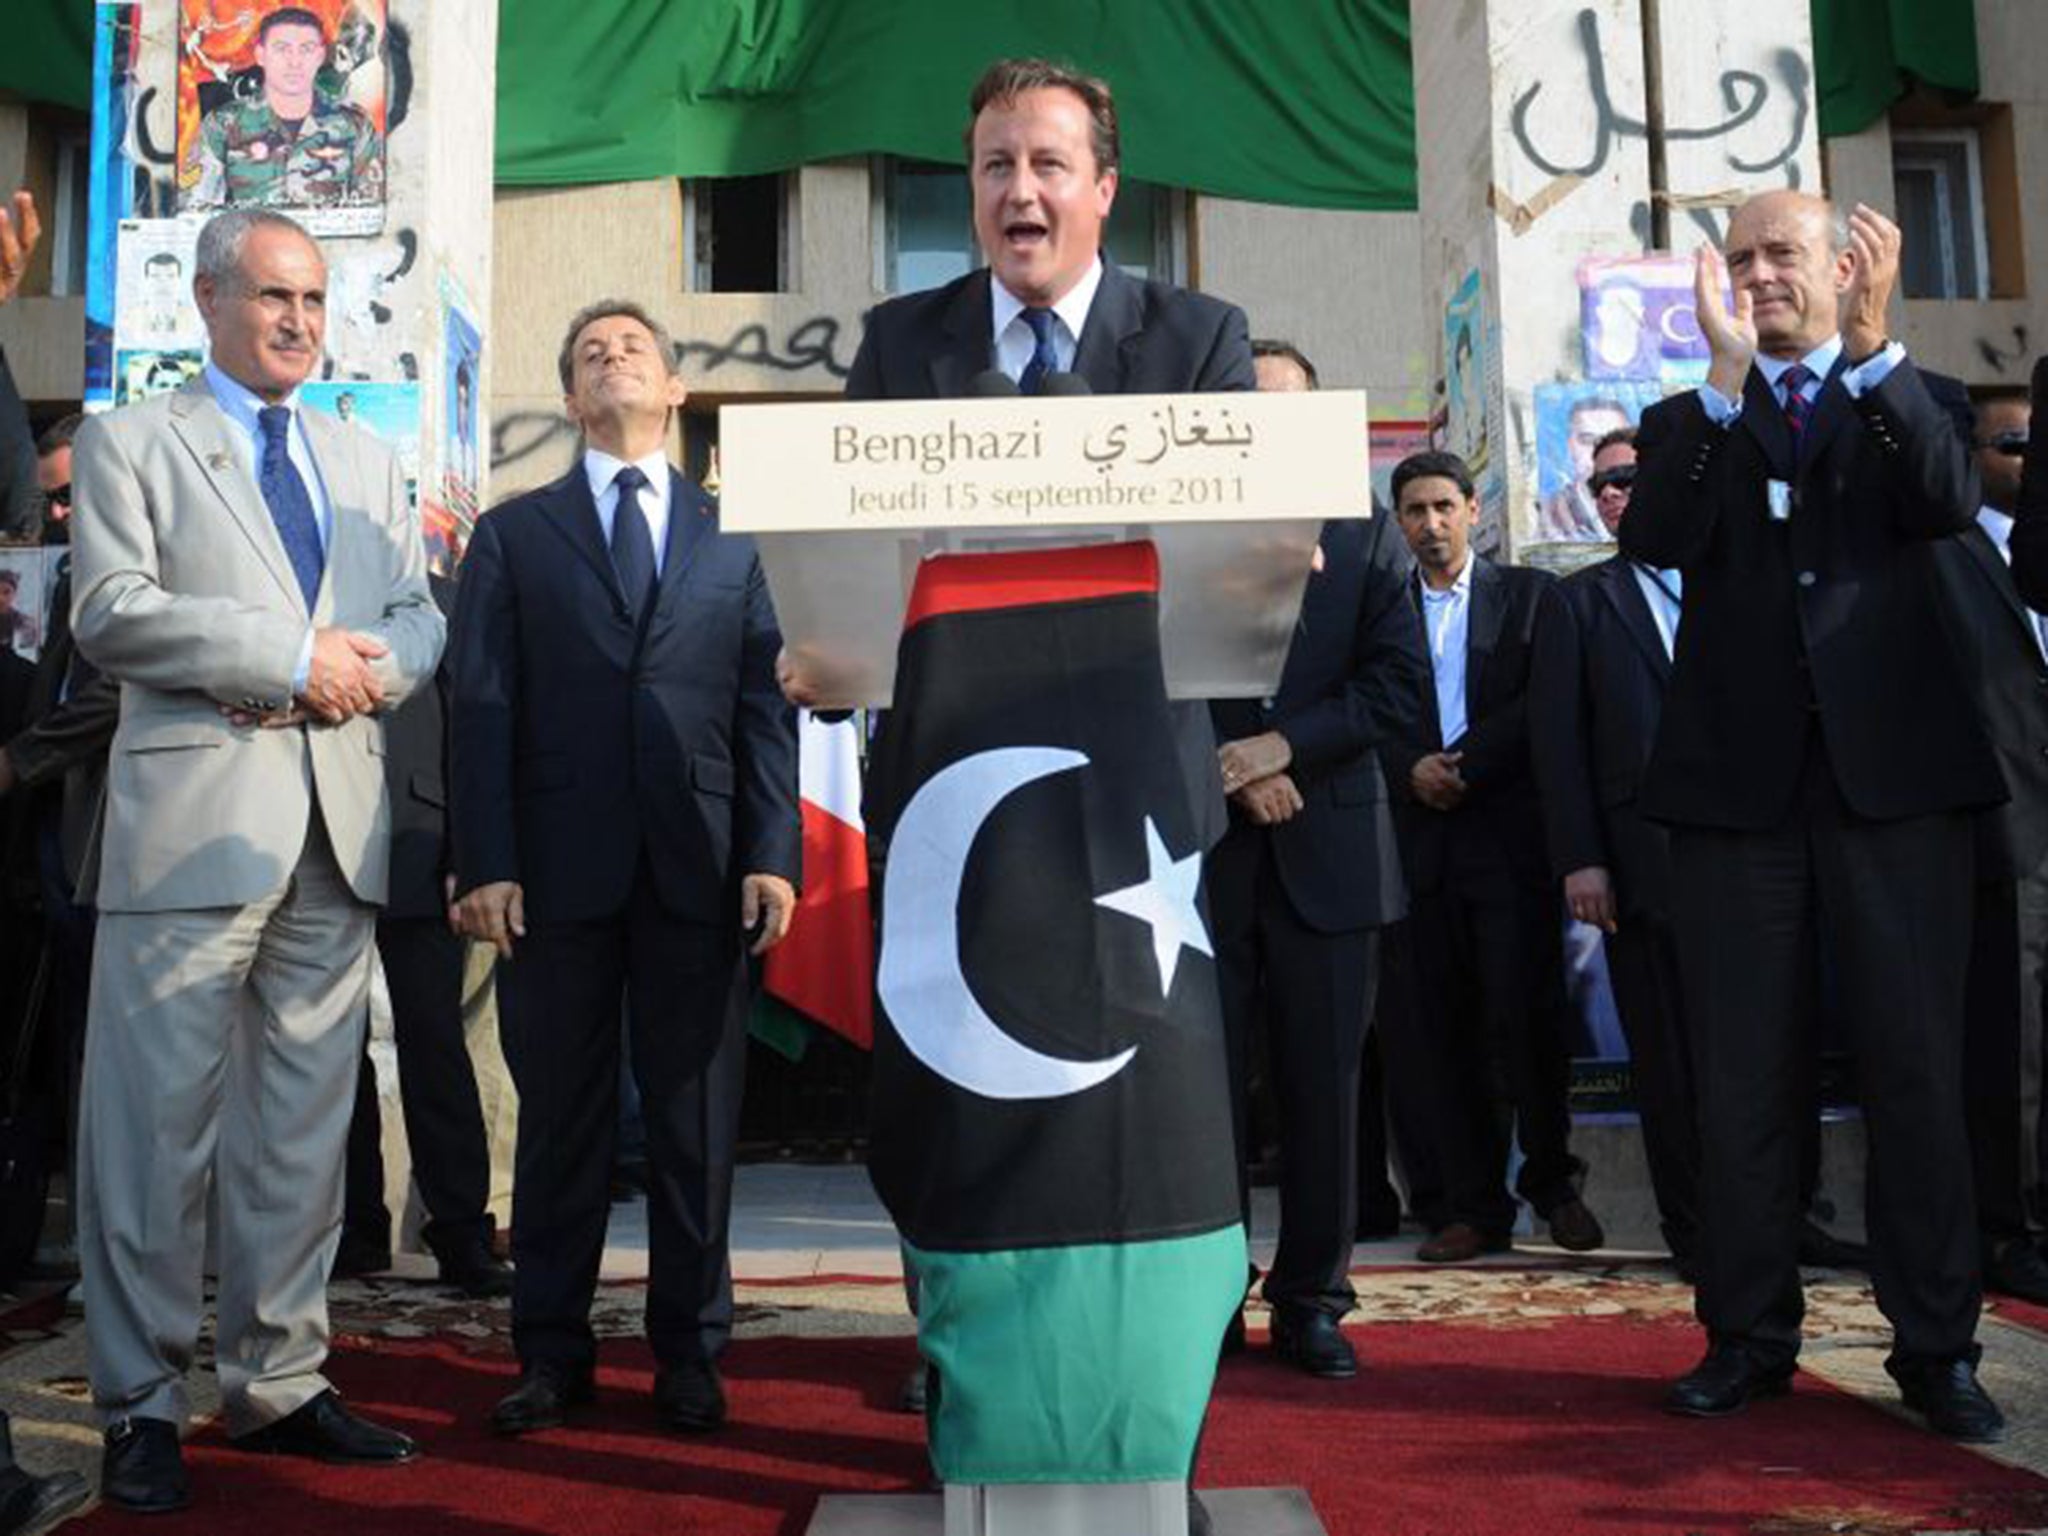 Hollow victory: David Cameron in Benghazi in 2011 after Gaddafi’s downfall